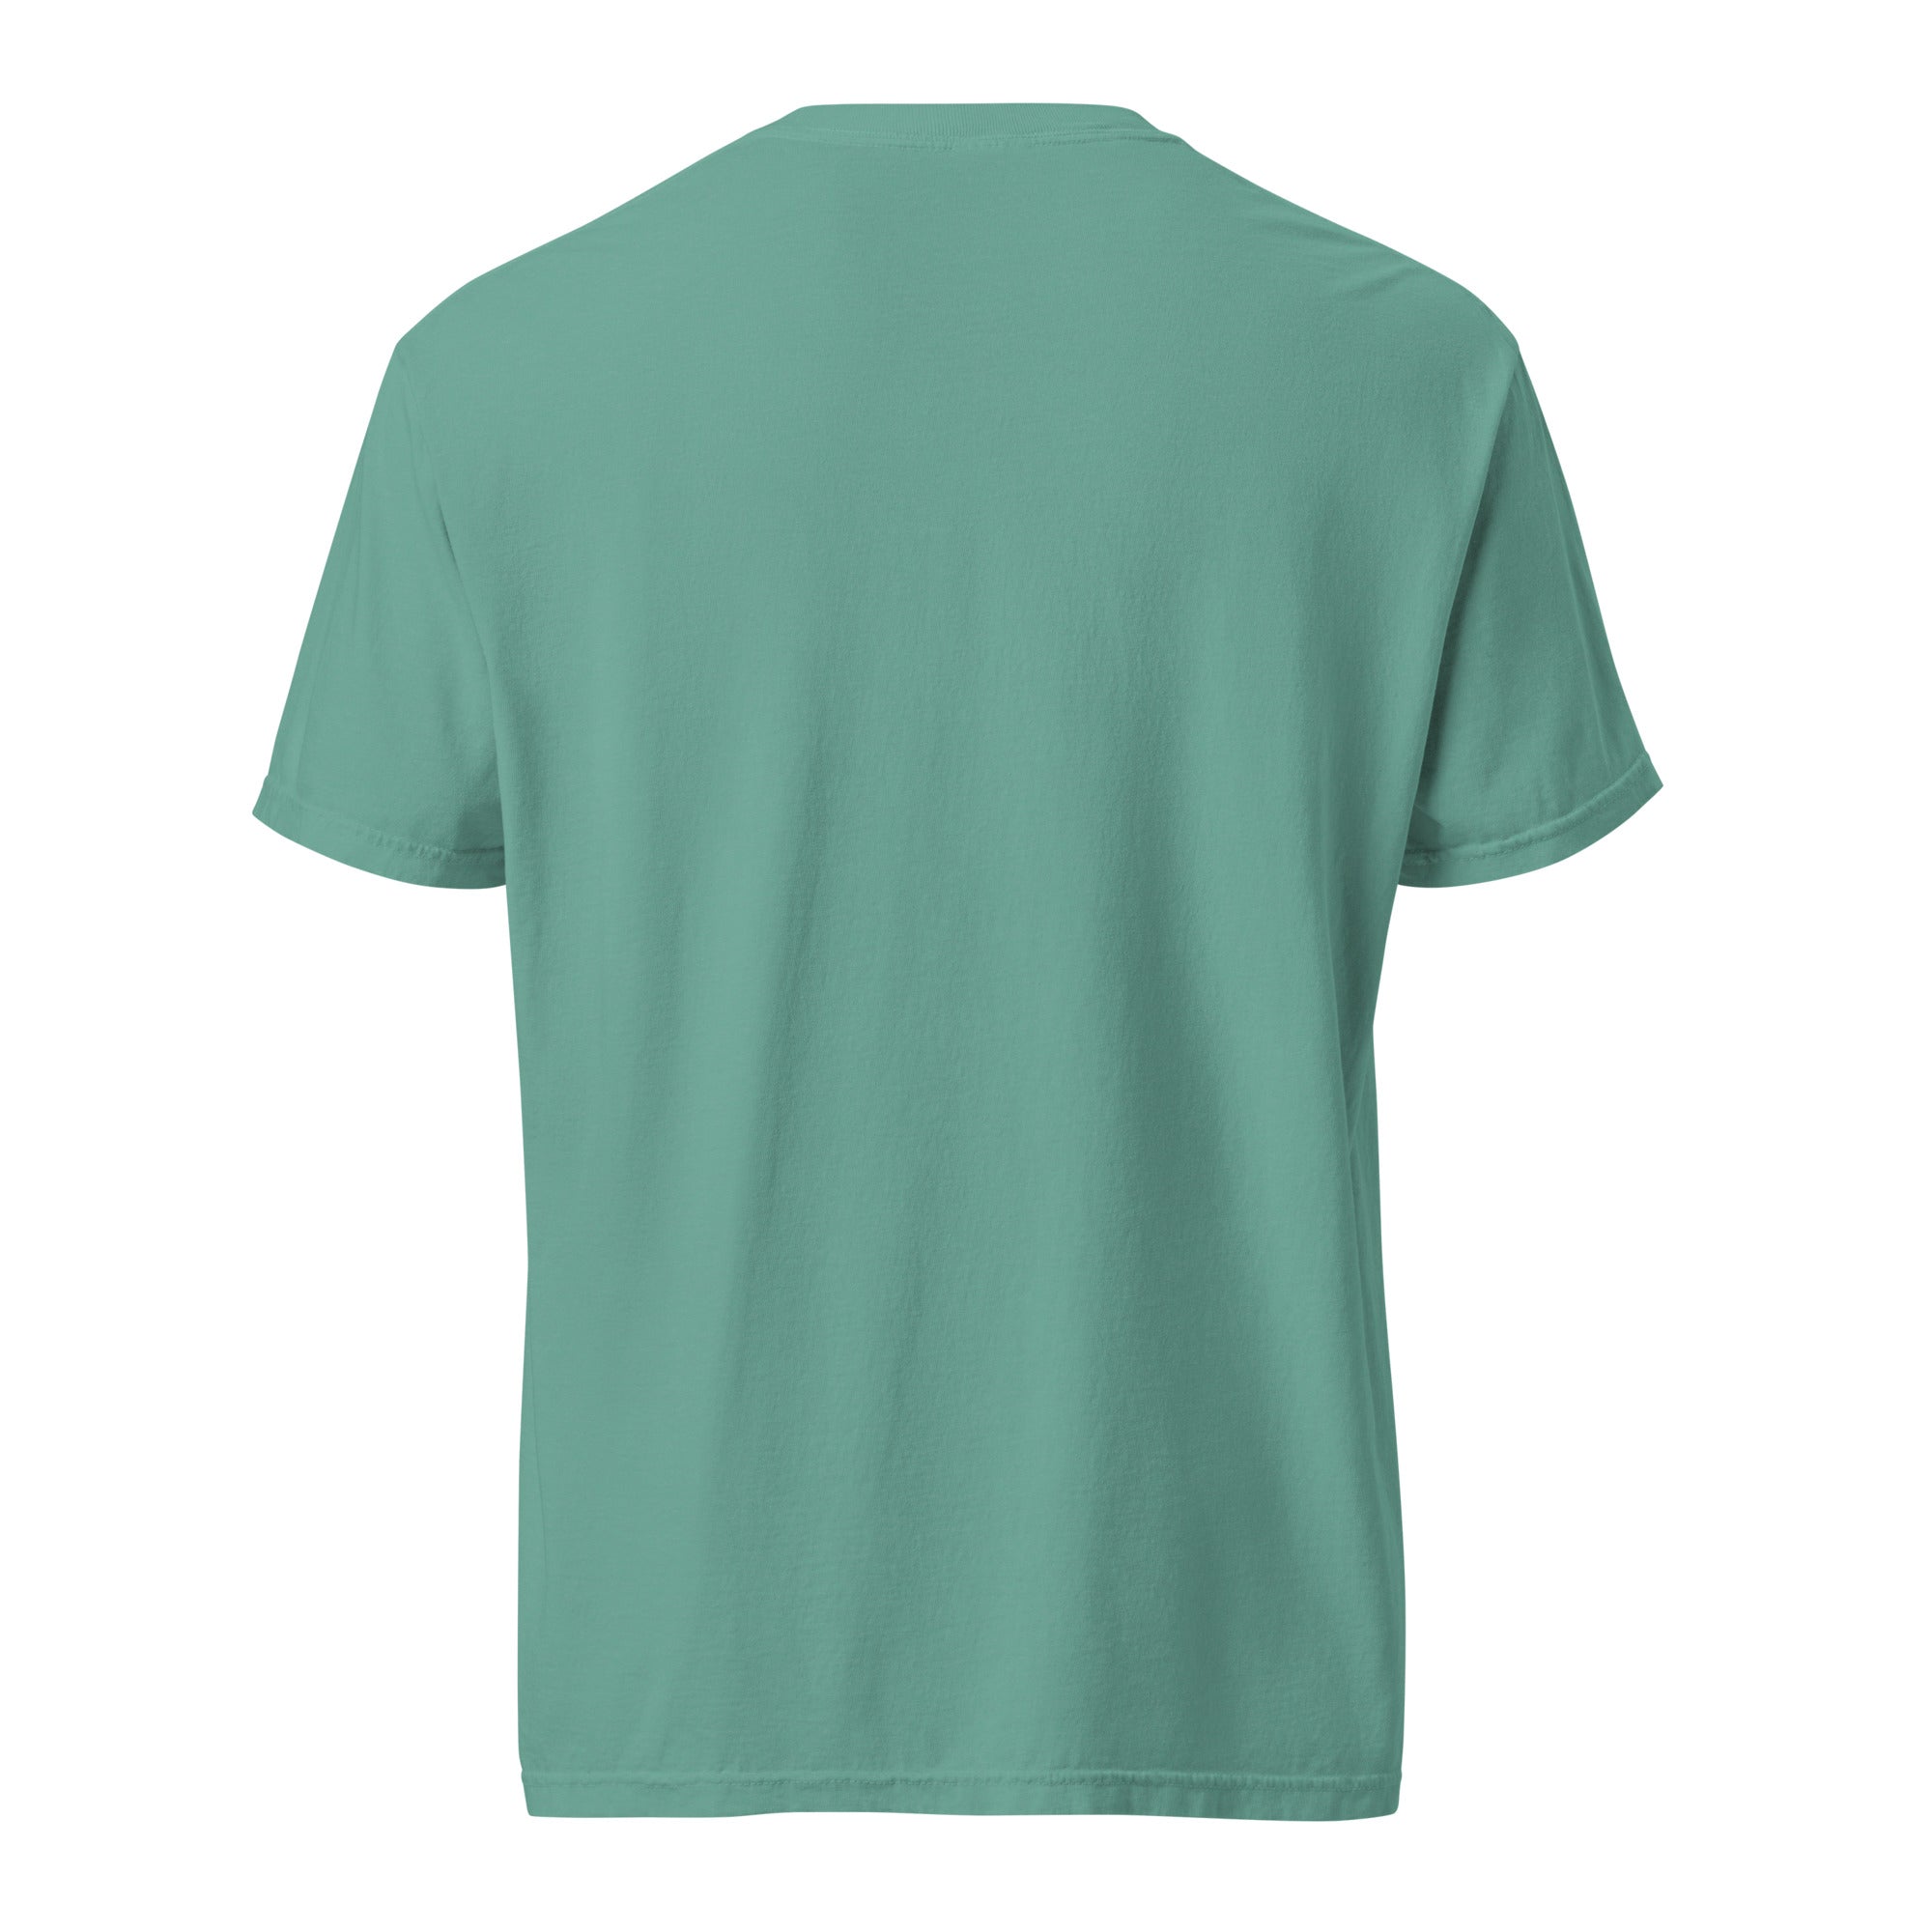 Coral Reef Unisex garment-dyed heavyweight t-shirt